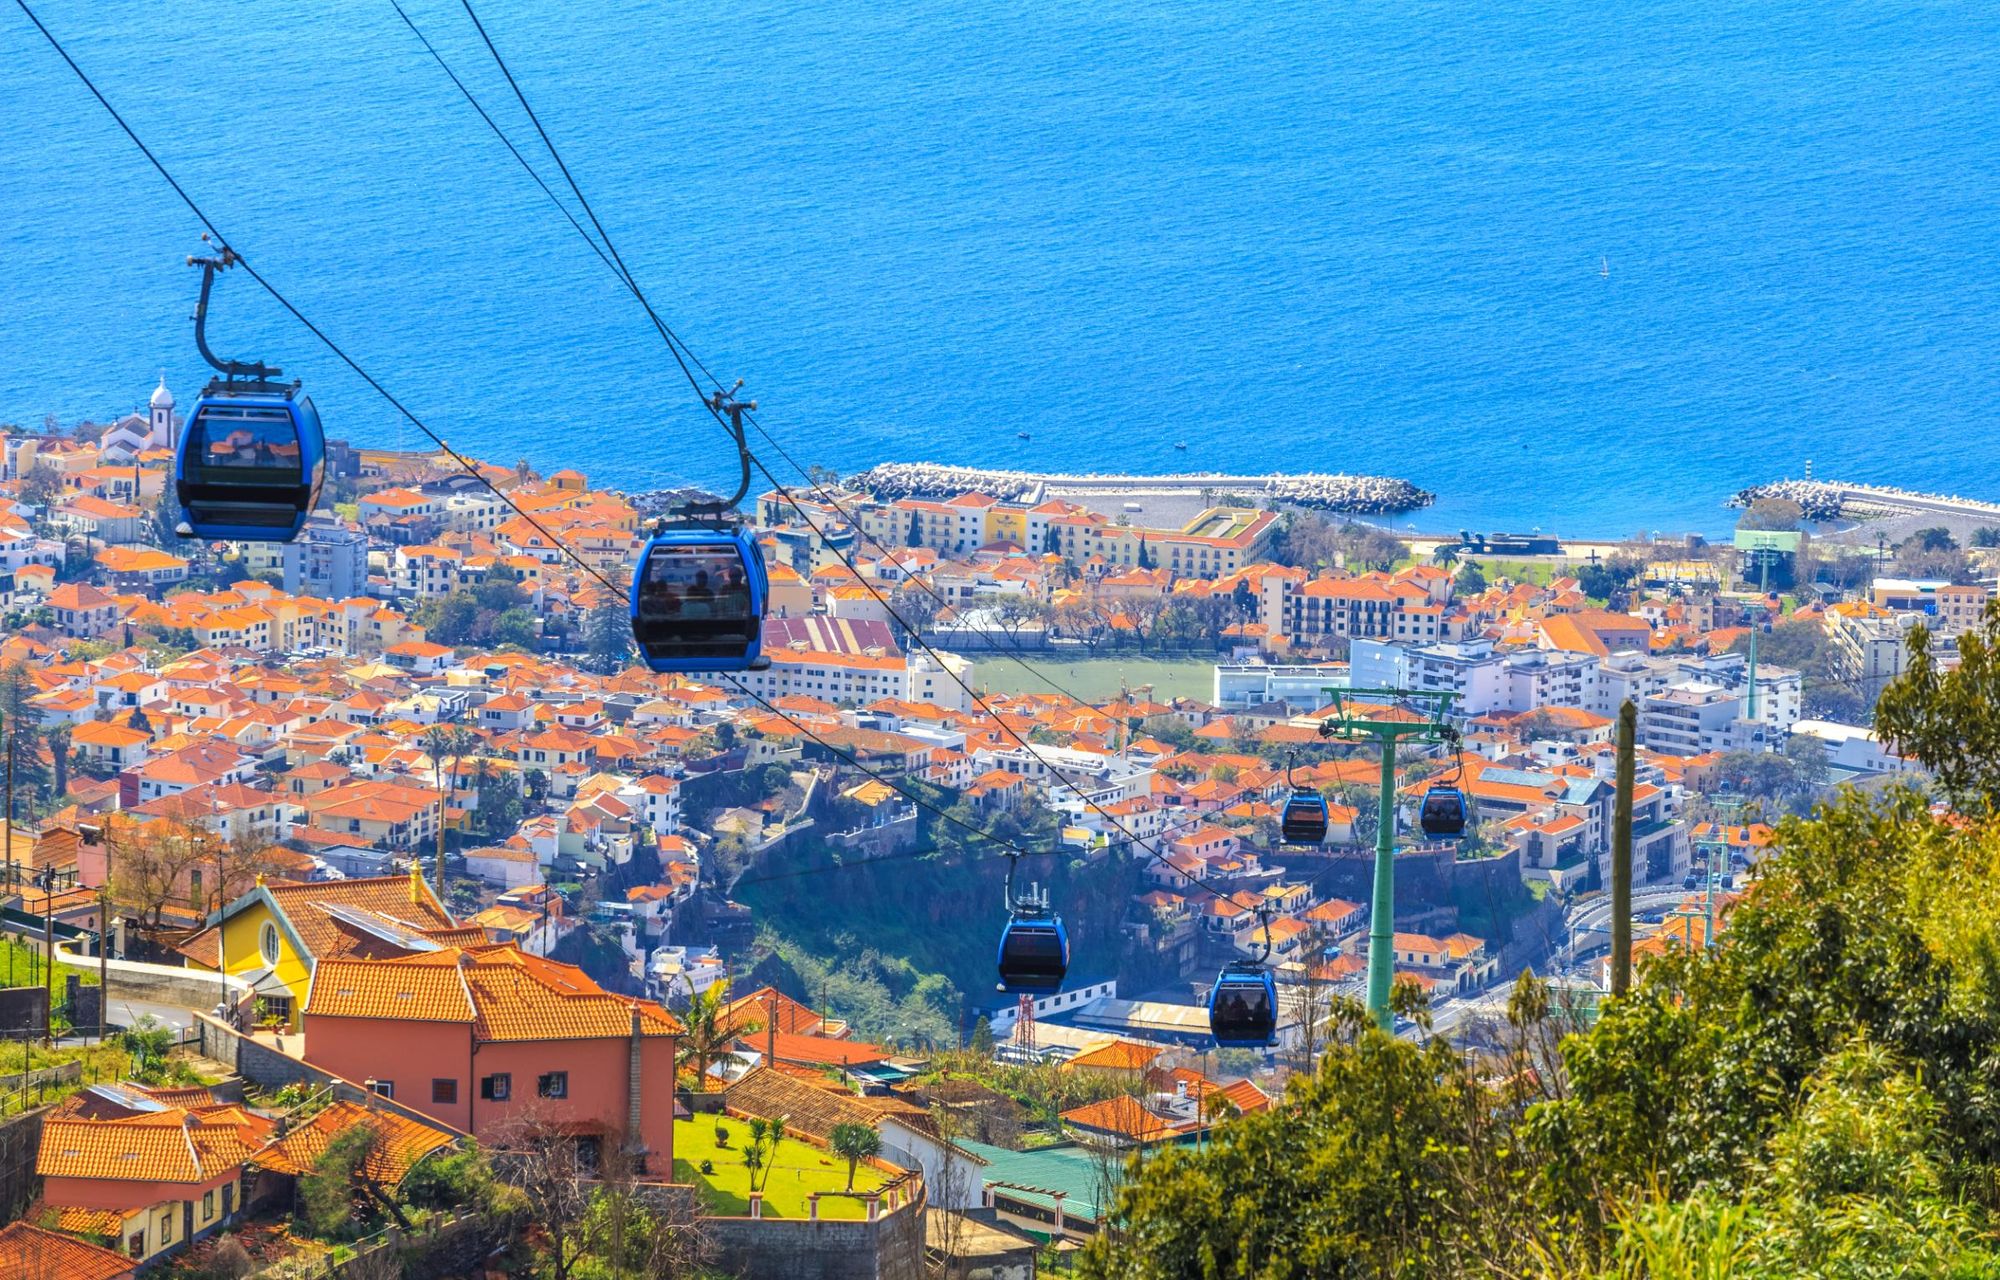 The cable car above Funchal, Madeira. Photo: Getty